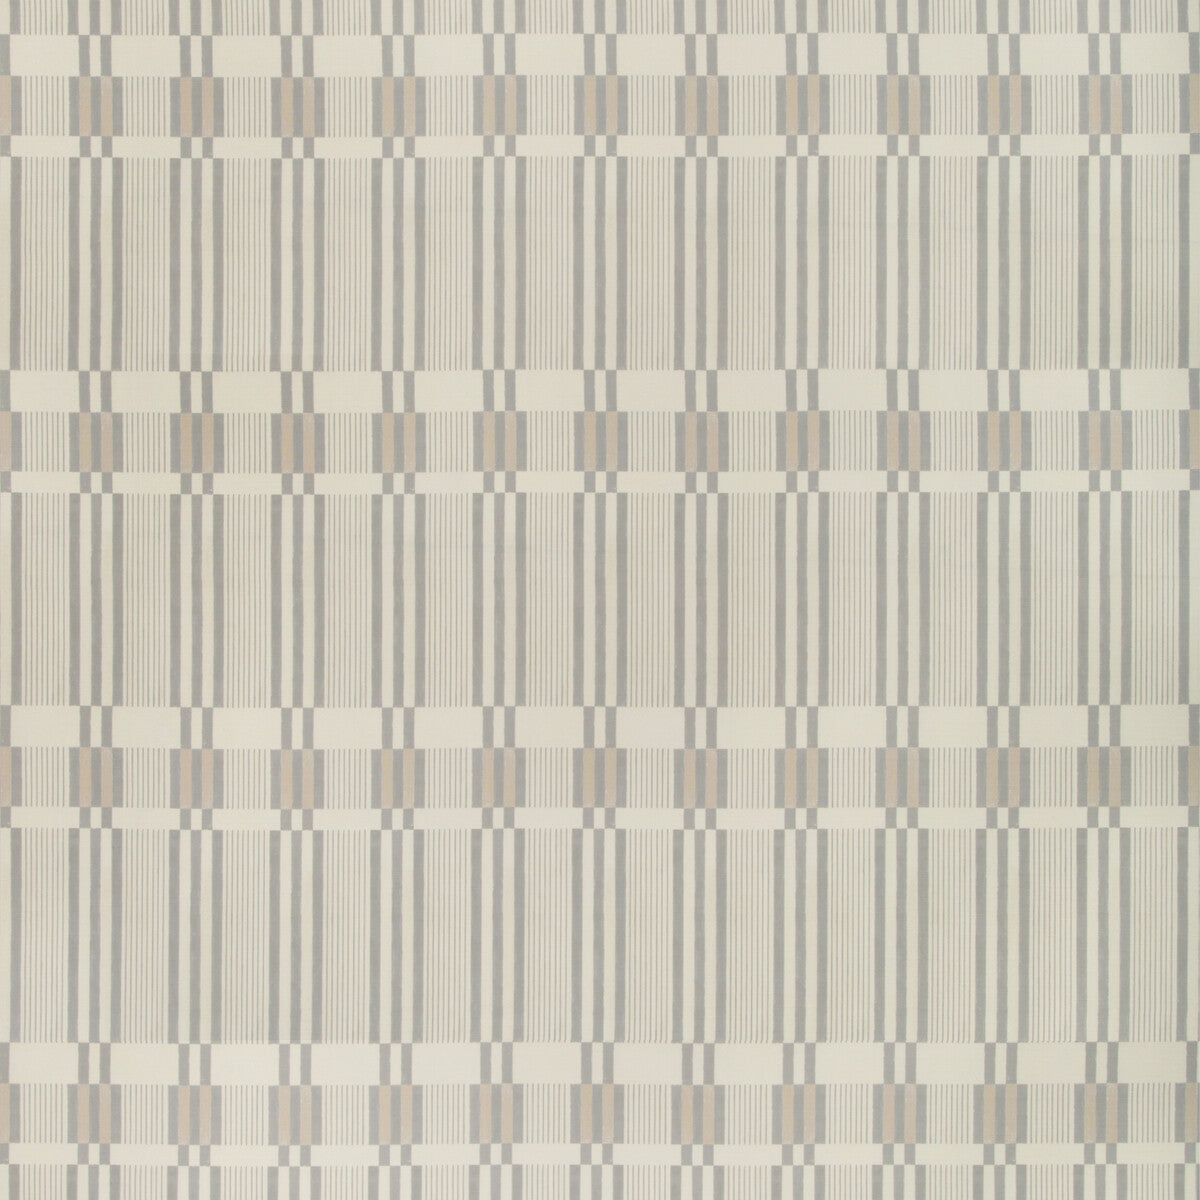 Bandeau fabric in fog color - pattern GWF-3746.111.0 - by Lee Jofa Modern in the Kw Terra Firma II Indoor Outdoor collection